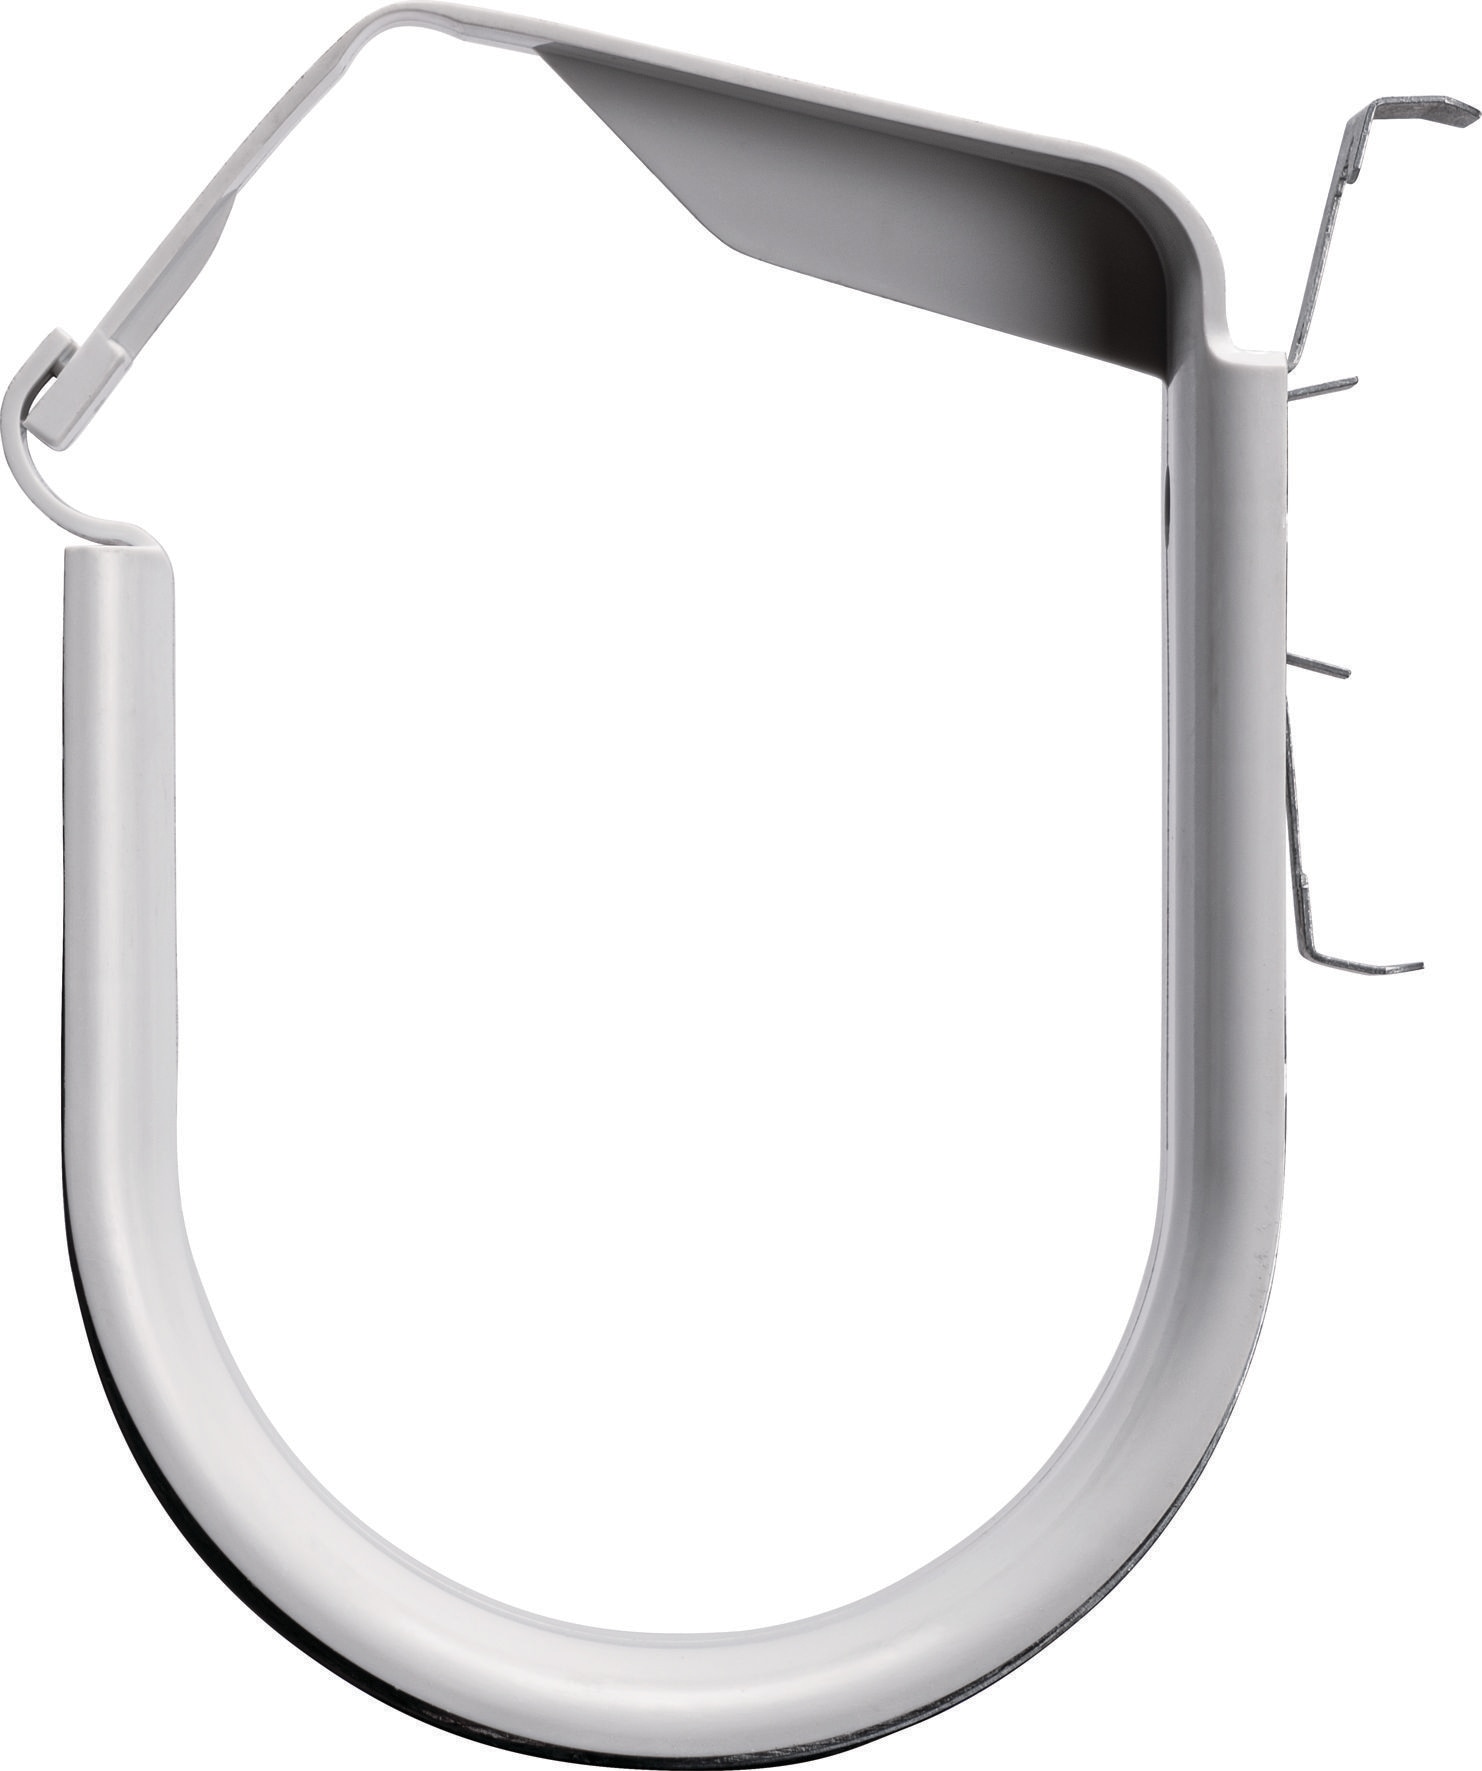 2'' JHook Wide/ret - batwing clip - Box of 50 [F000639], J-Hooks, Wire  and Cable Hangers